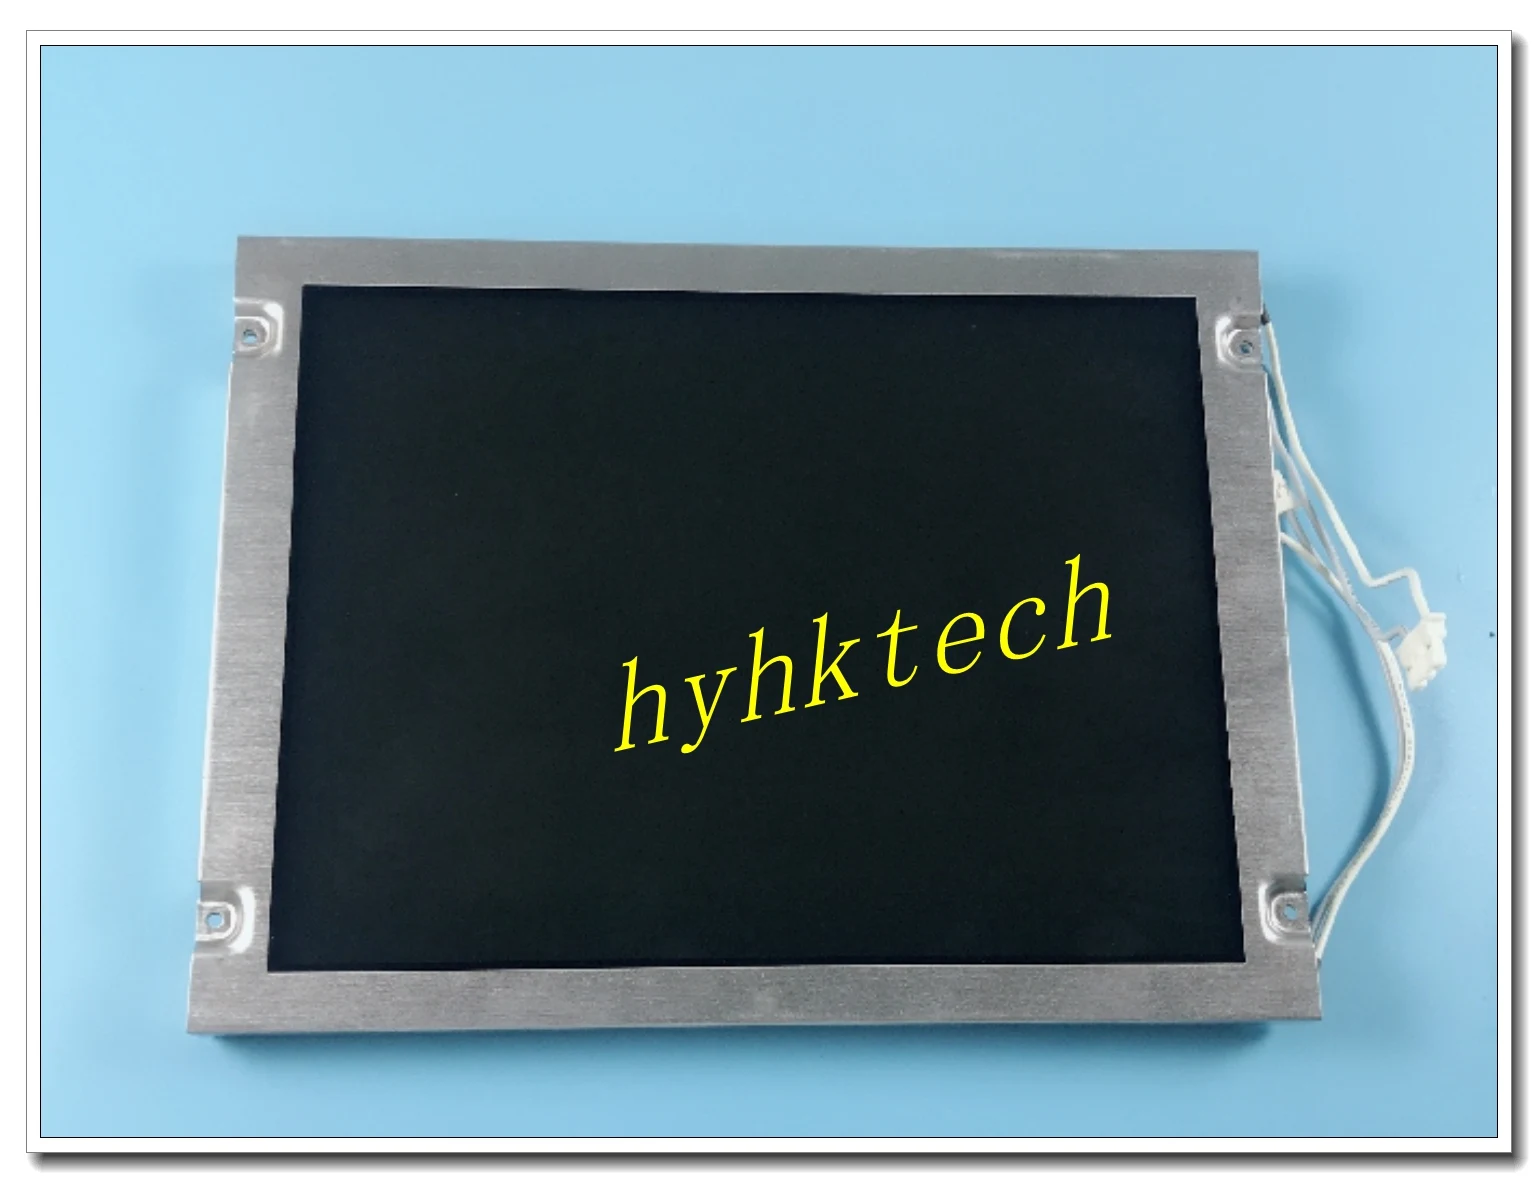 

NL6448BC26-01 8.4INCH Industrial LCD ,New&A+ grade in stock,test working before shipment